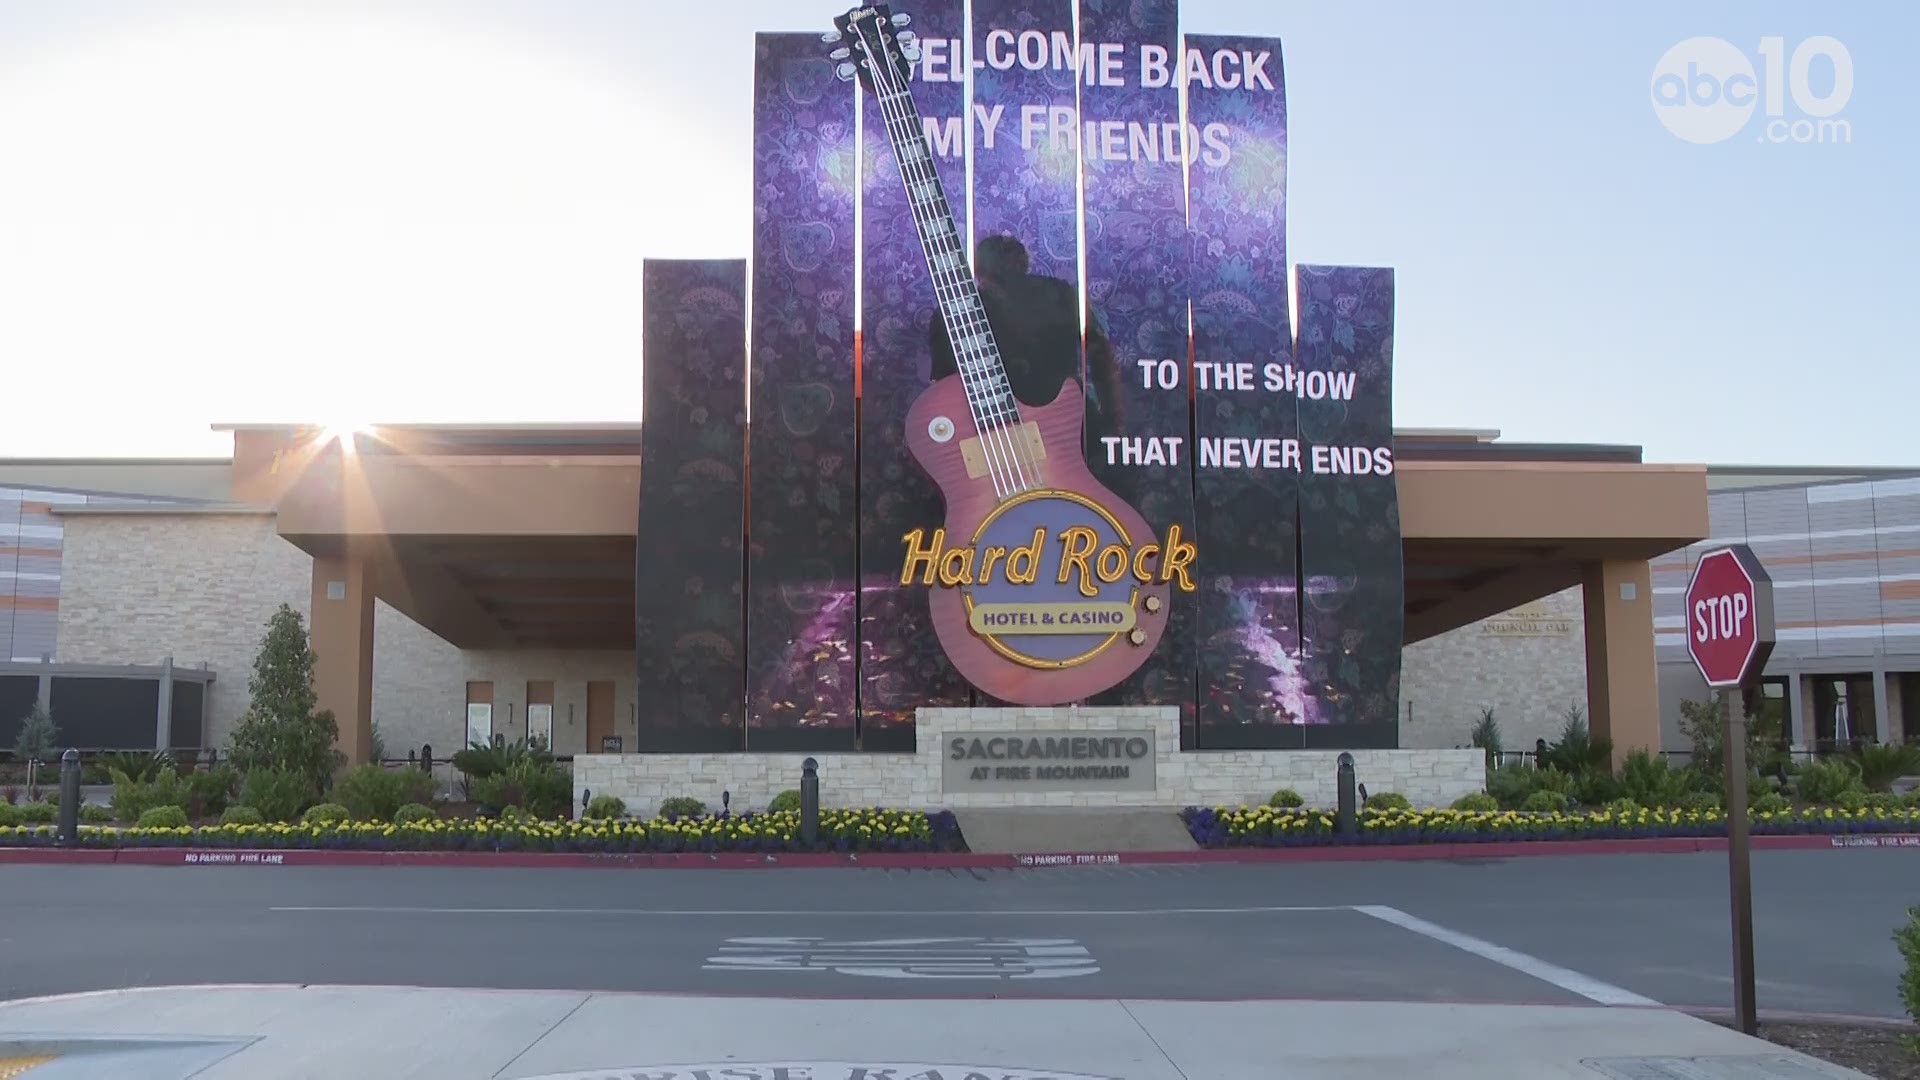 Hard Rock Sacramento reopens for the first time since the pandemic closed the casino. Here's an inside look at the first day for gaming and dining.